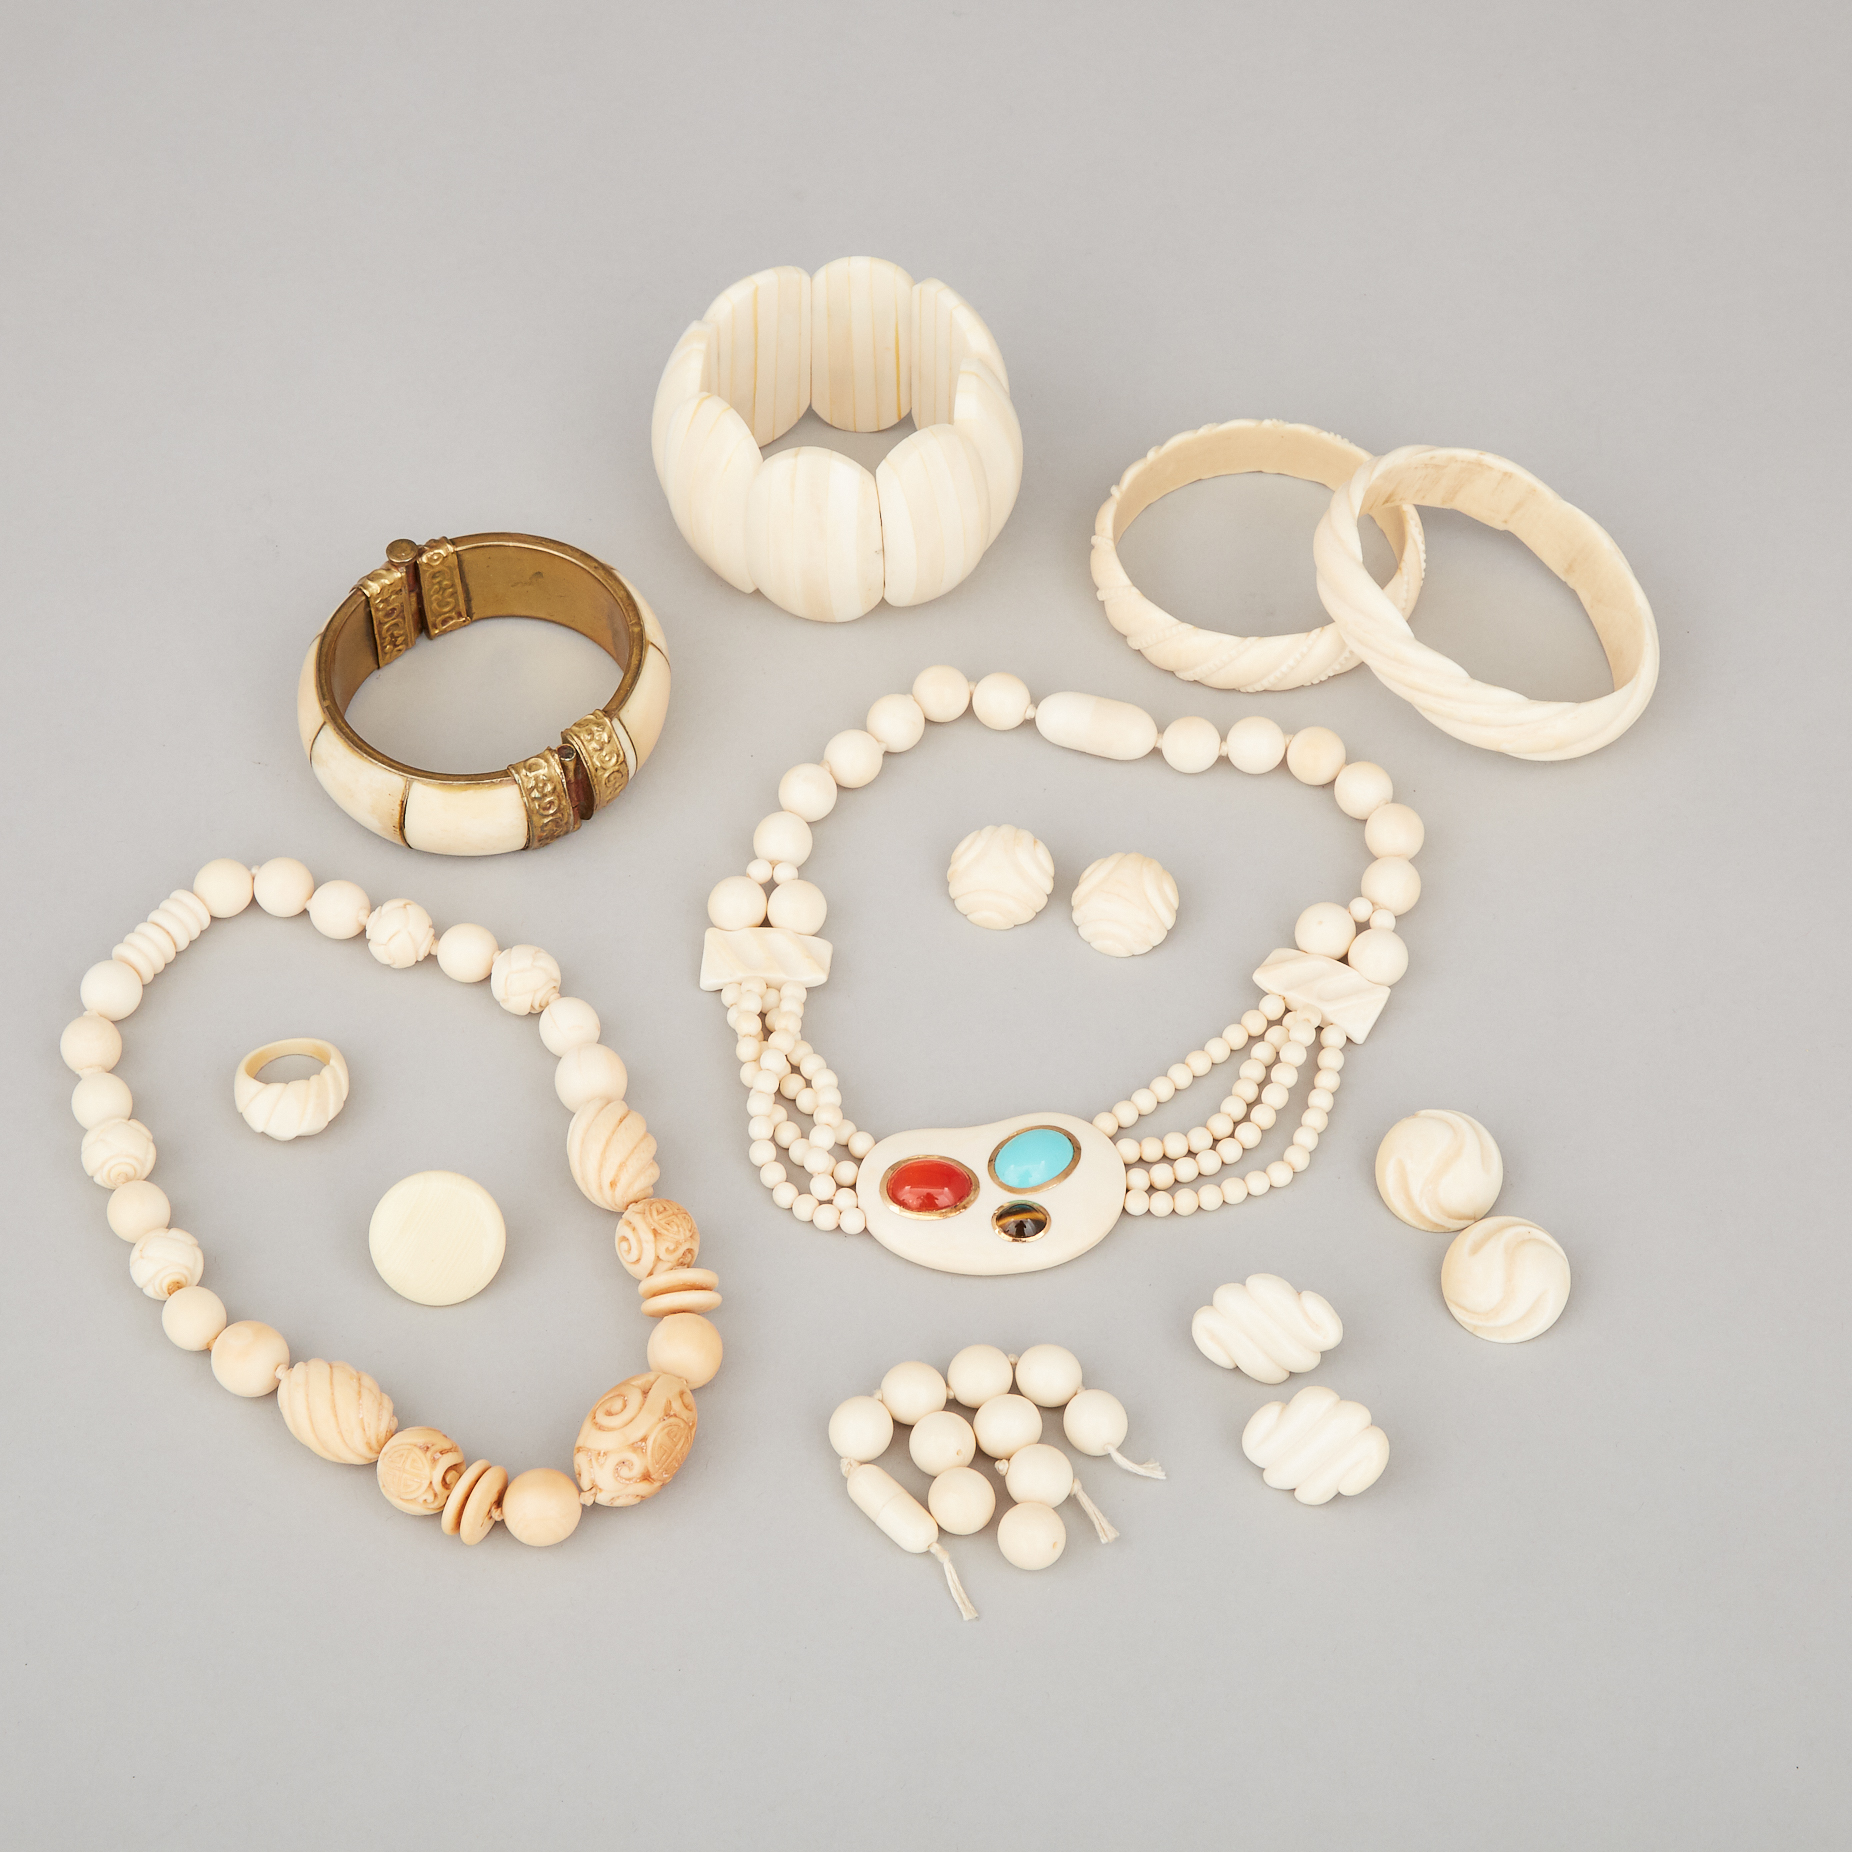 A Group of Ivory Carved Jewellery, Mid-20th Century